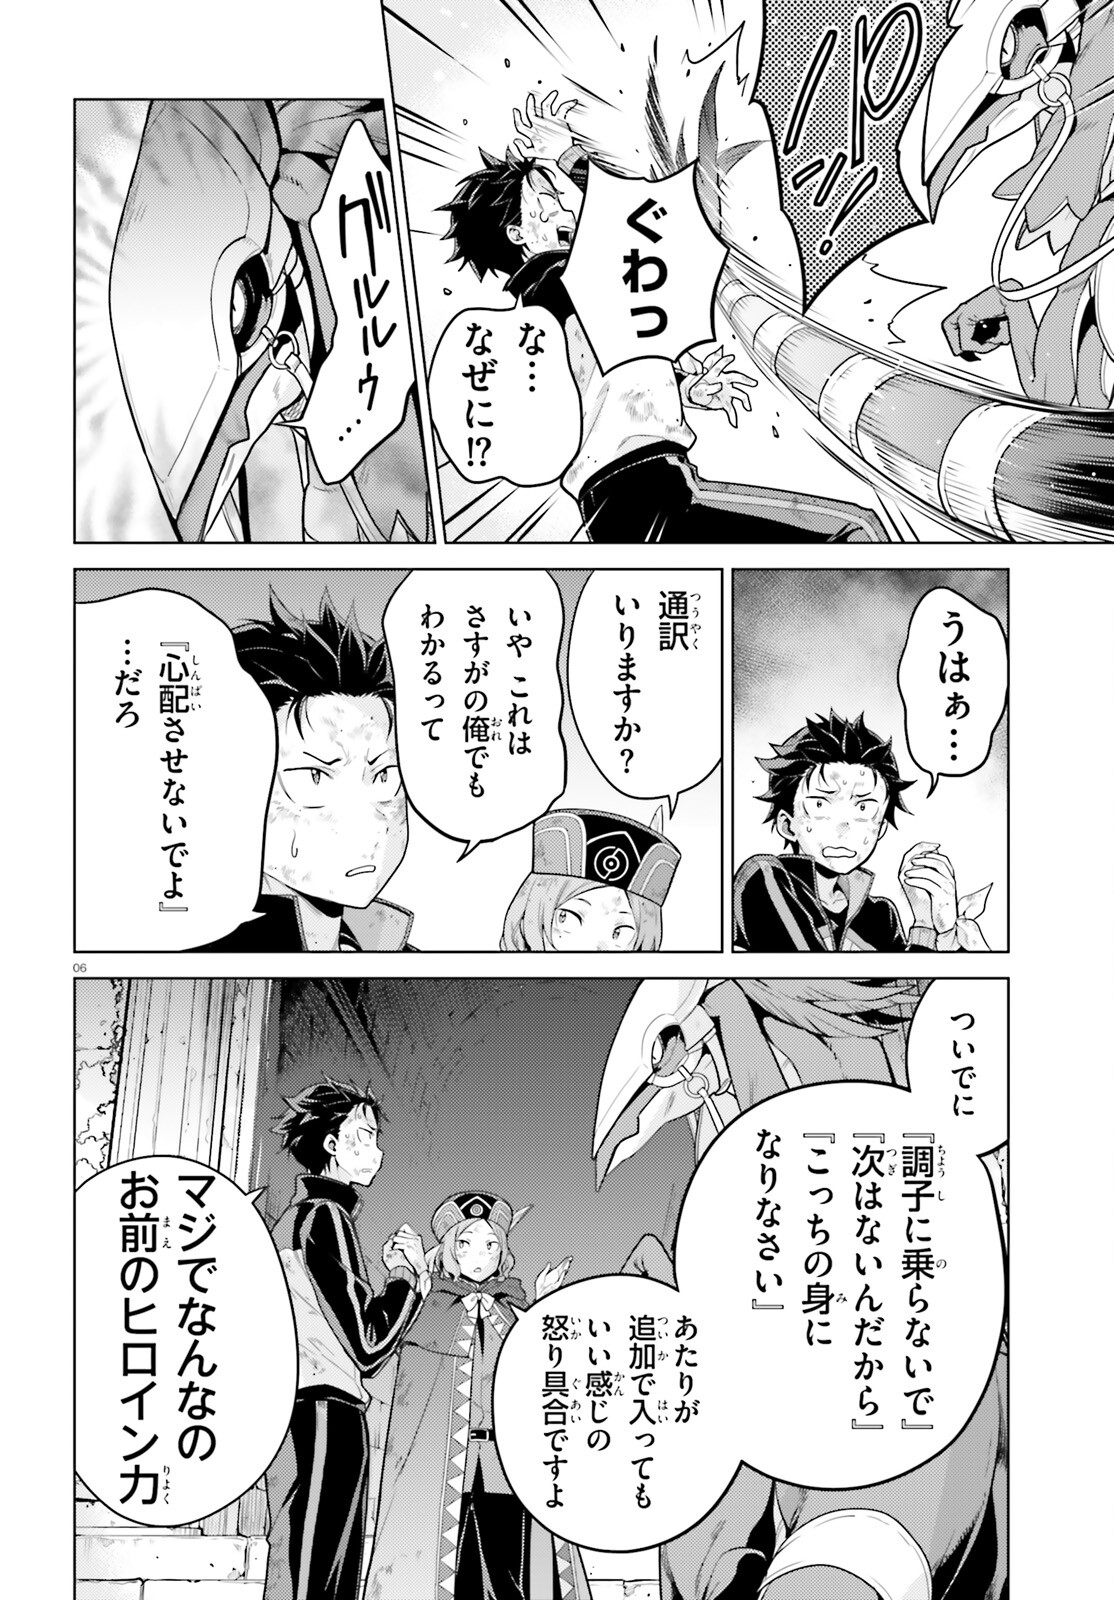 Reゼロから始める異世界生活 第四章 聖域と強欲の魔女 第49話 - Page 6